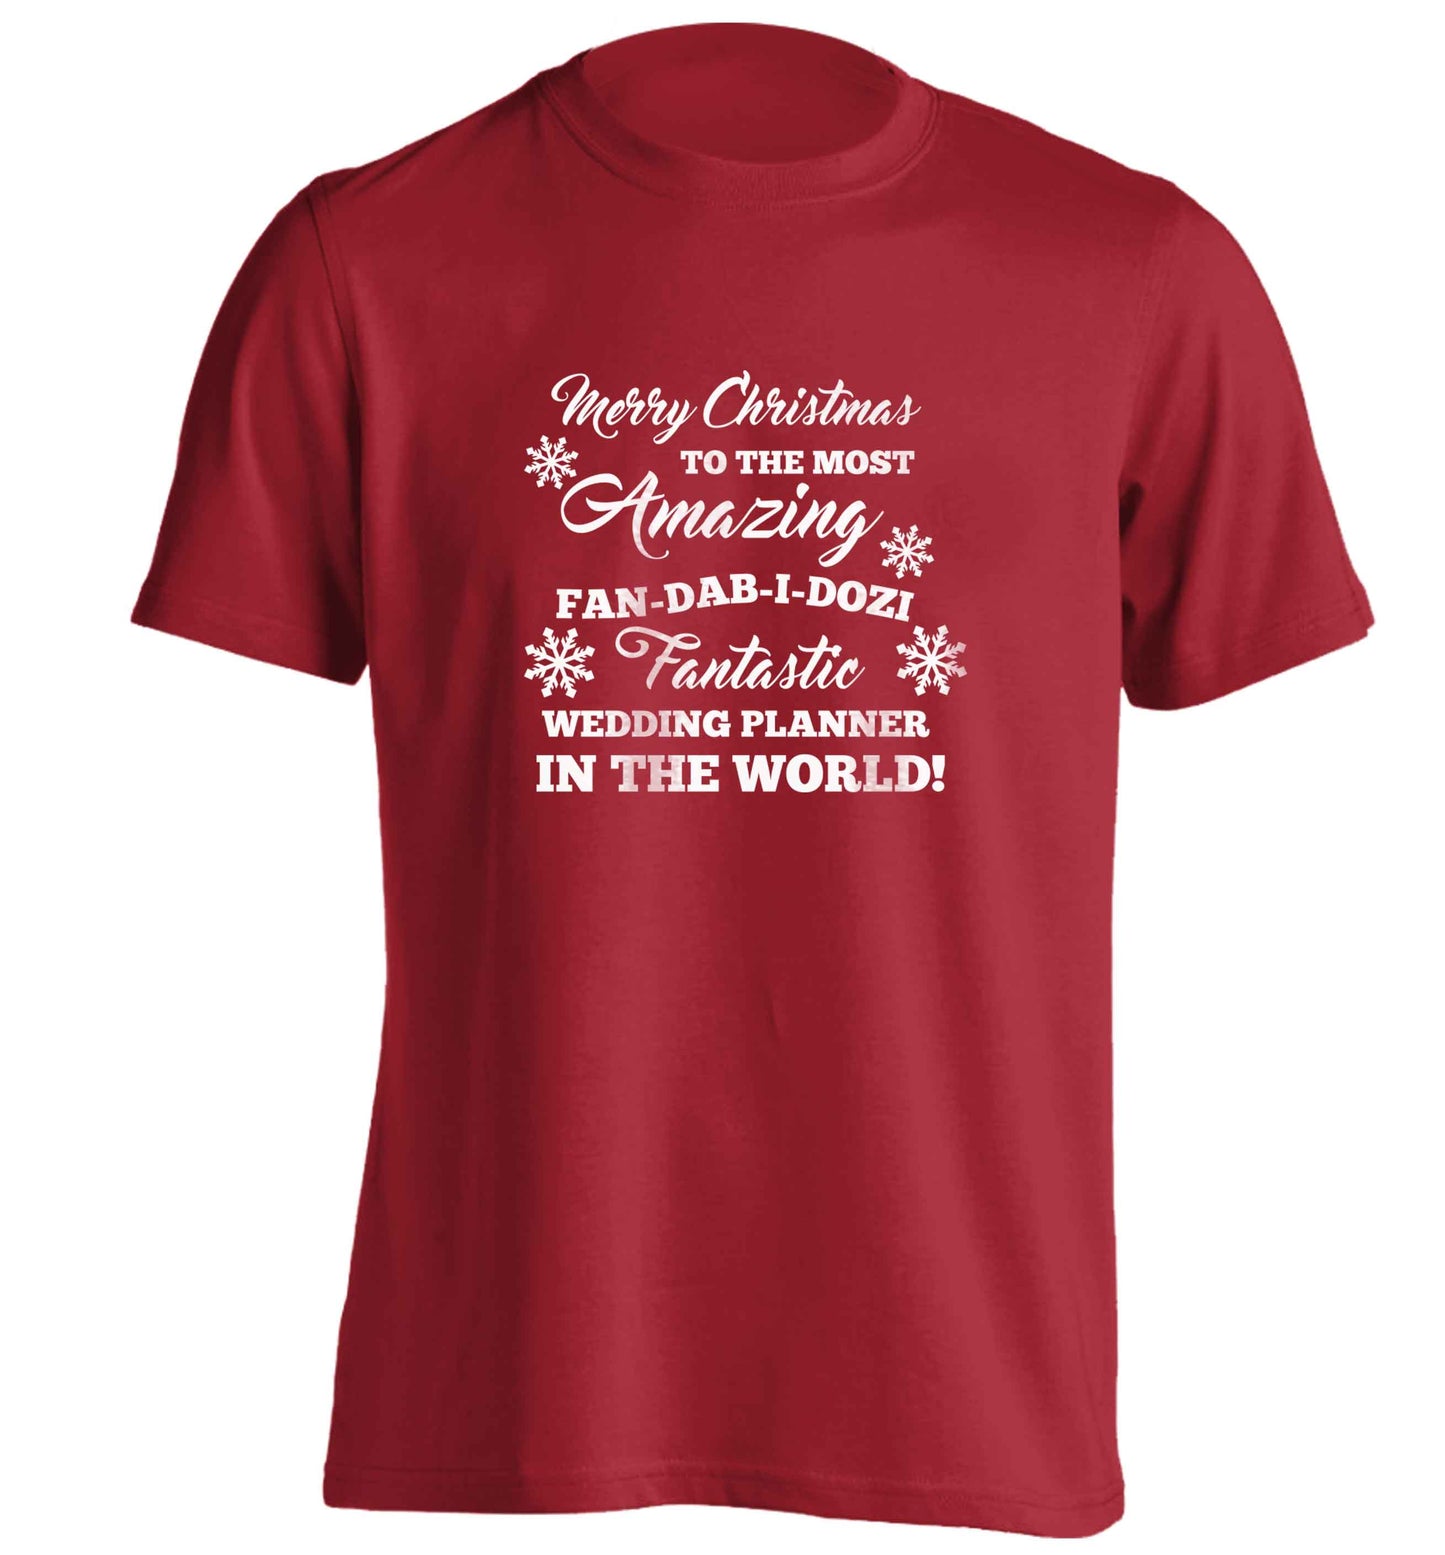 Merry Christmas to the most amazing fan-dab-i-dozi fantasic wedding planner in the world adults unisex red Tshirt 2XL